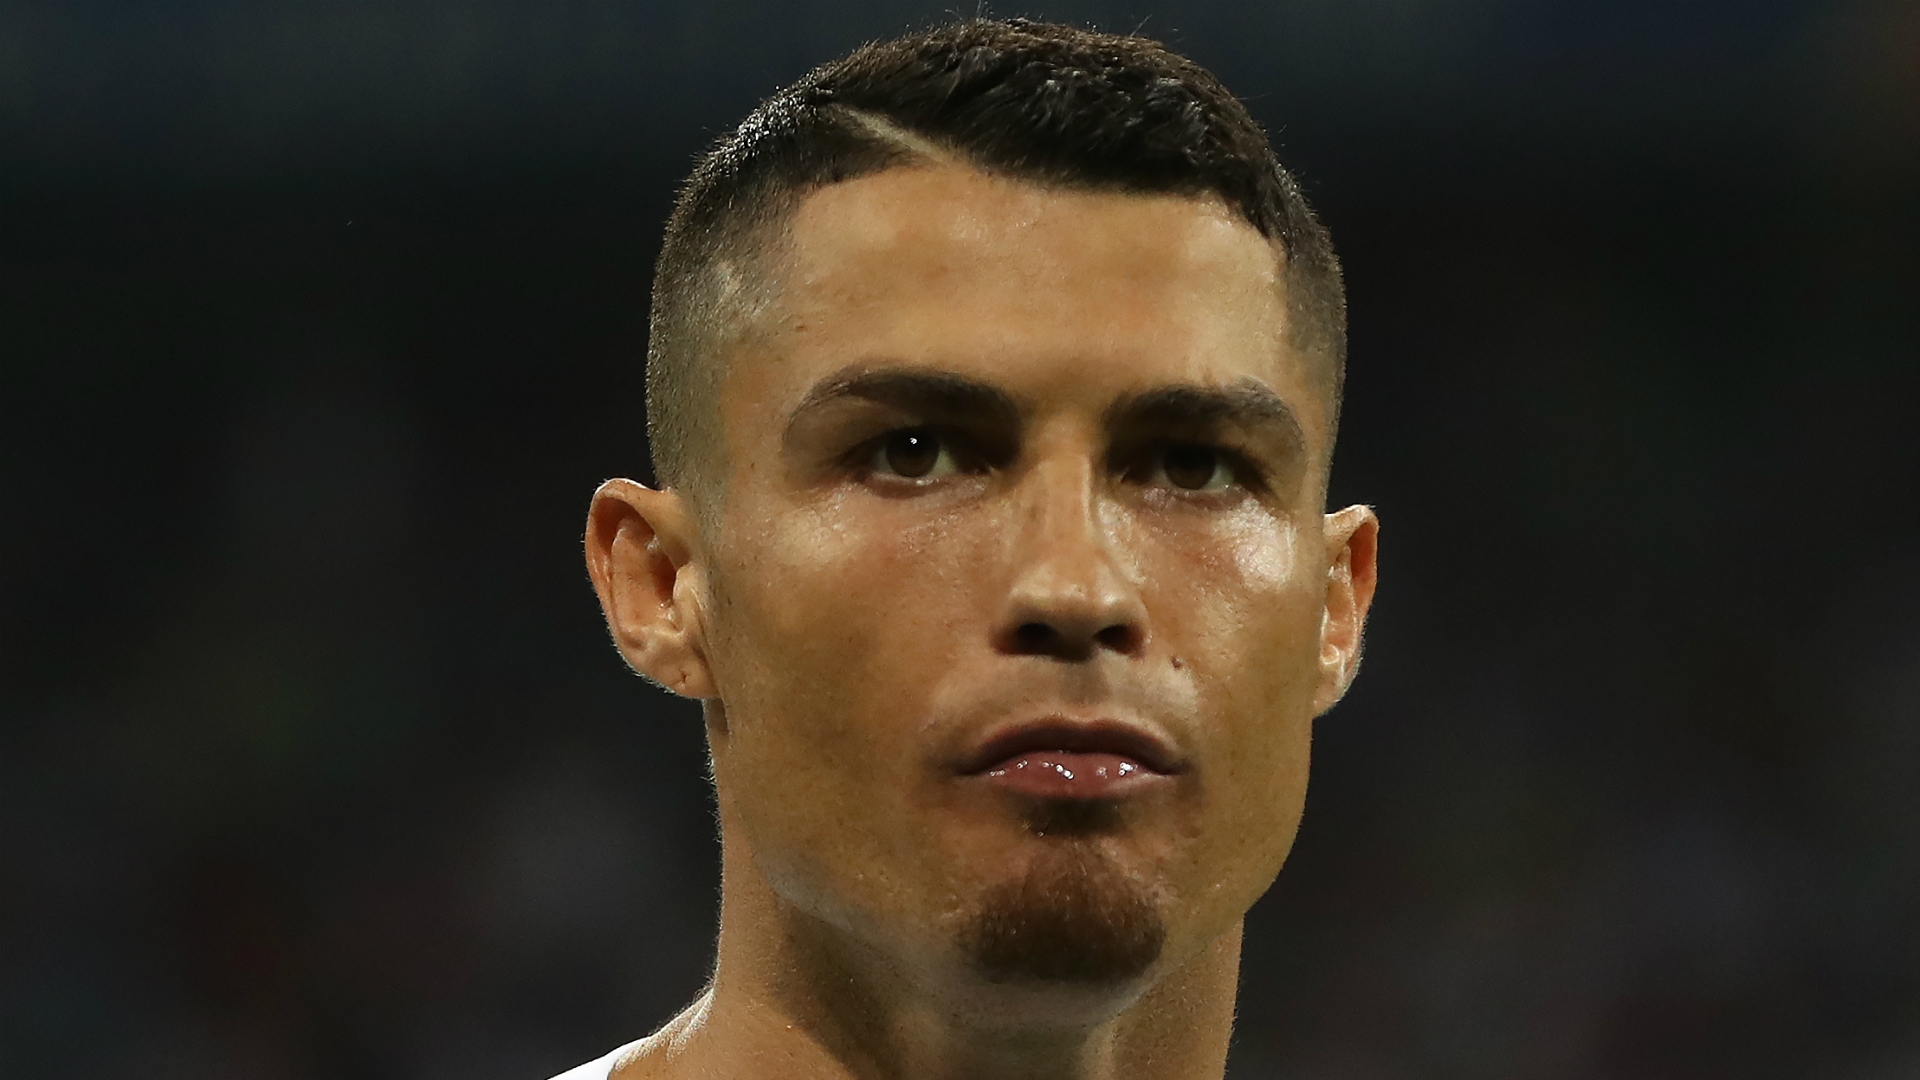 Ronaldo to Juventus, the first important World Cup transfer?